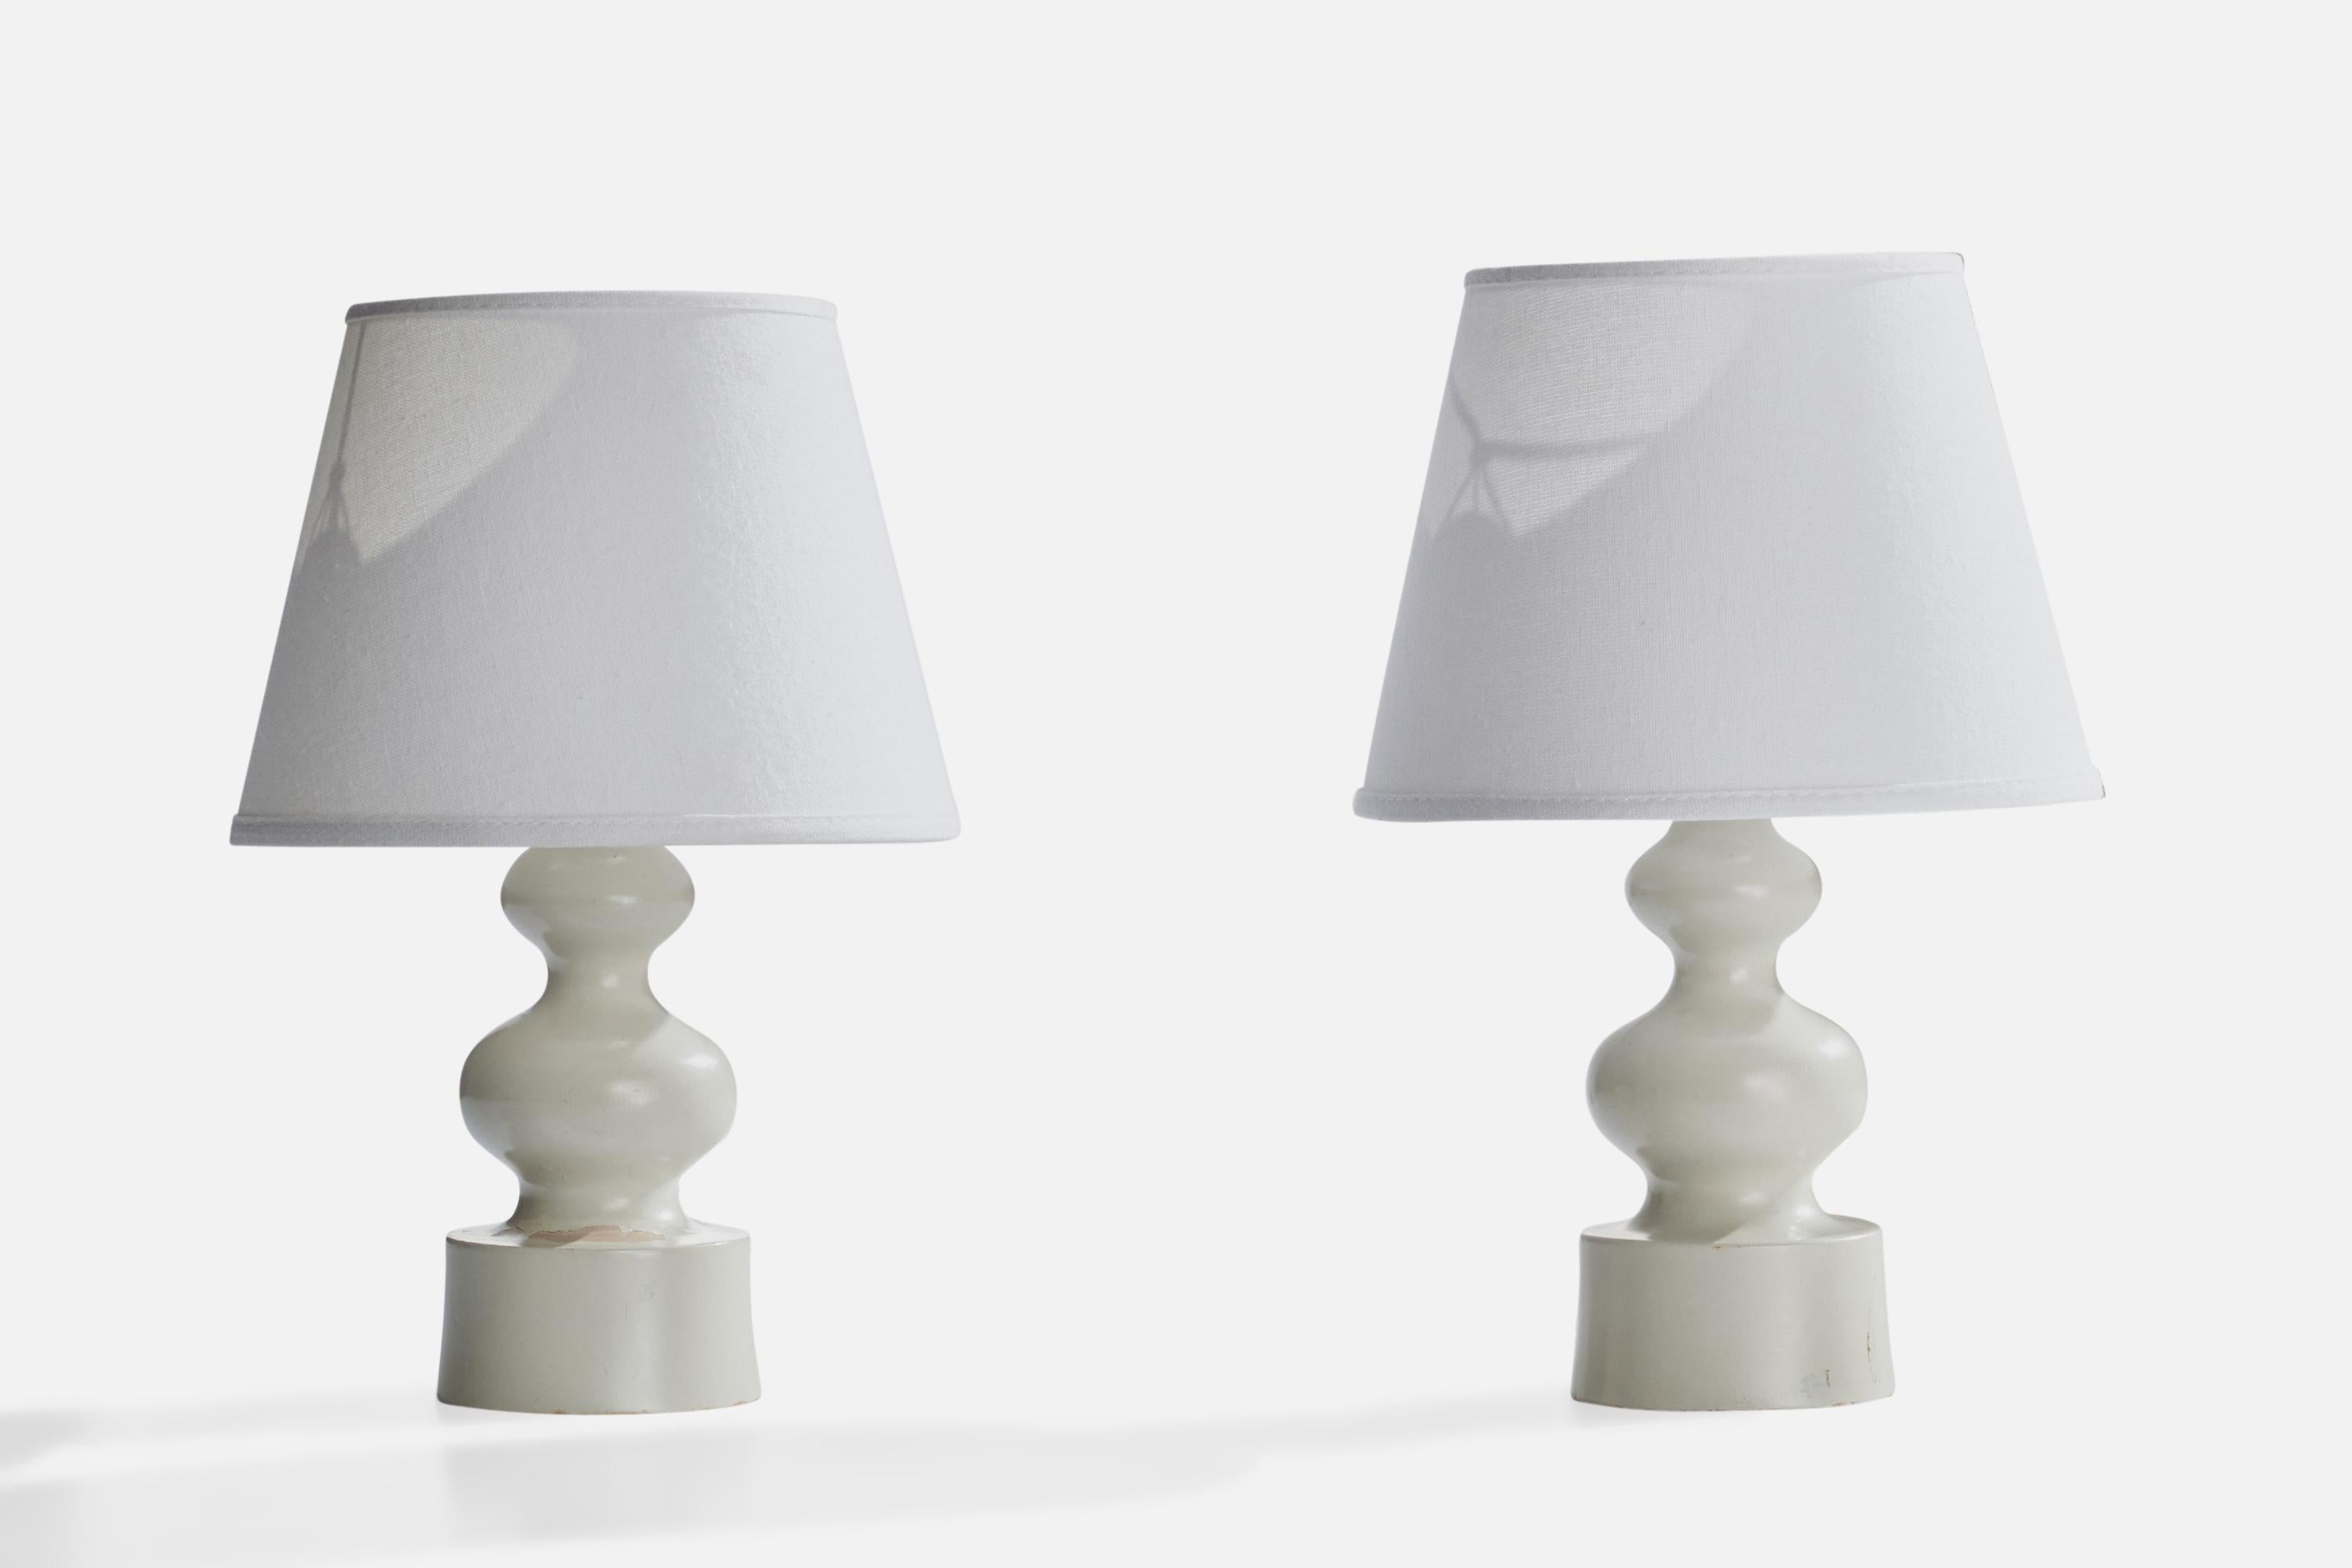 A pair of white-lacquered wood table lamps designed and produced in Sweden, c. 1970s.

Dimensions of Lamp (inches): 9” H x 3.75” Diameter
Dimensions of Shade (inches): 5” Top Diameter x 7.75” Bottom Diameter x 6” H
Dimensions of Lamp with Shade